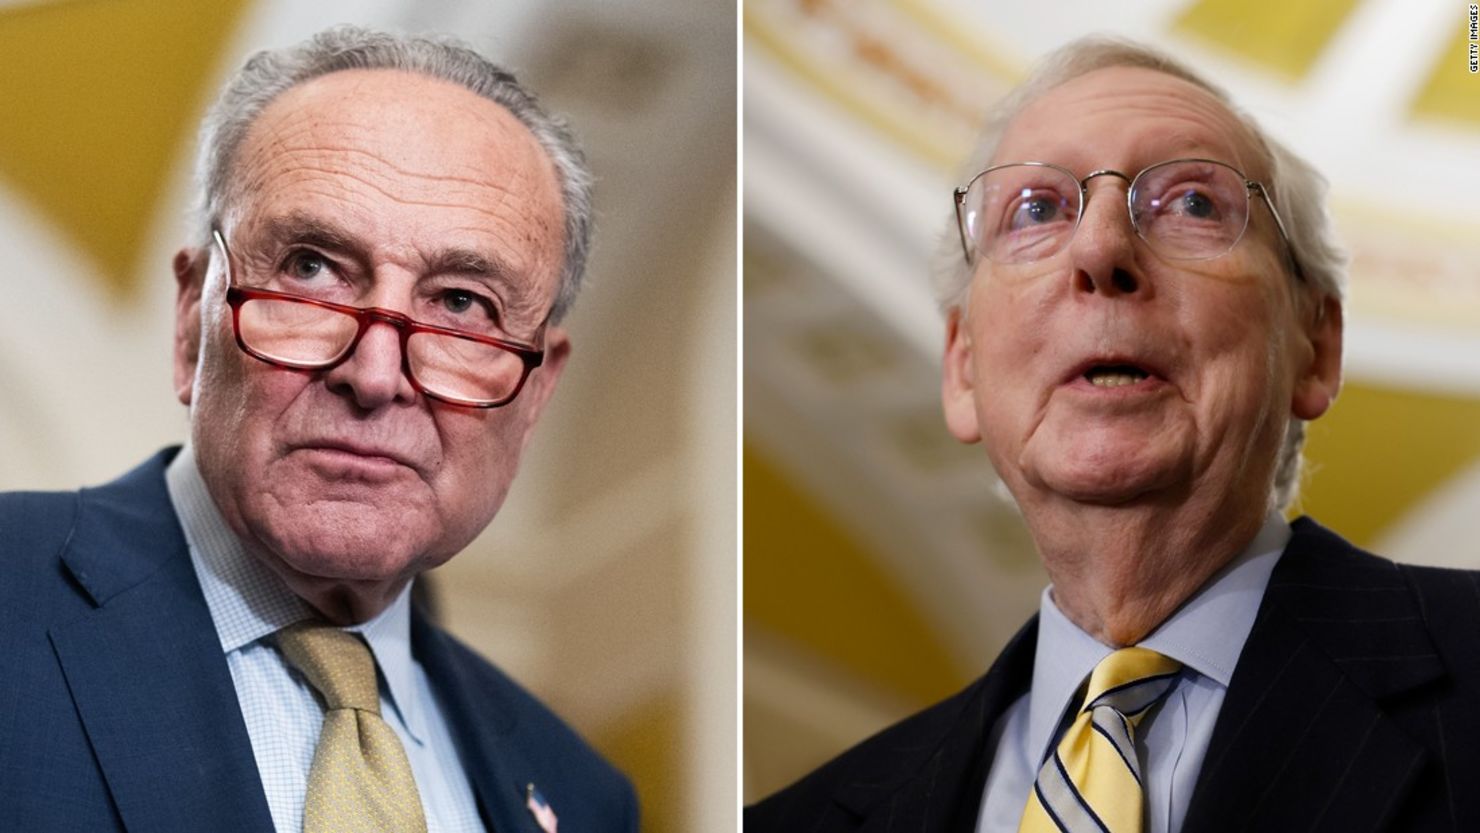 From left, Senate Majority Leader Charles Schumer and Senate Minority Leader Mitch McConnell.